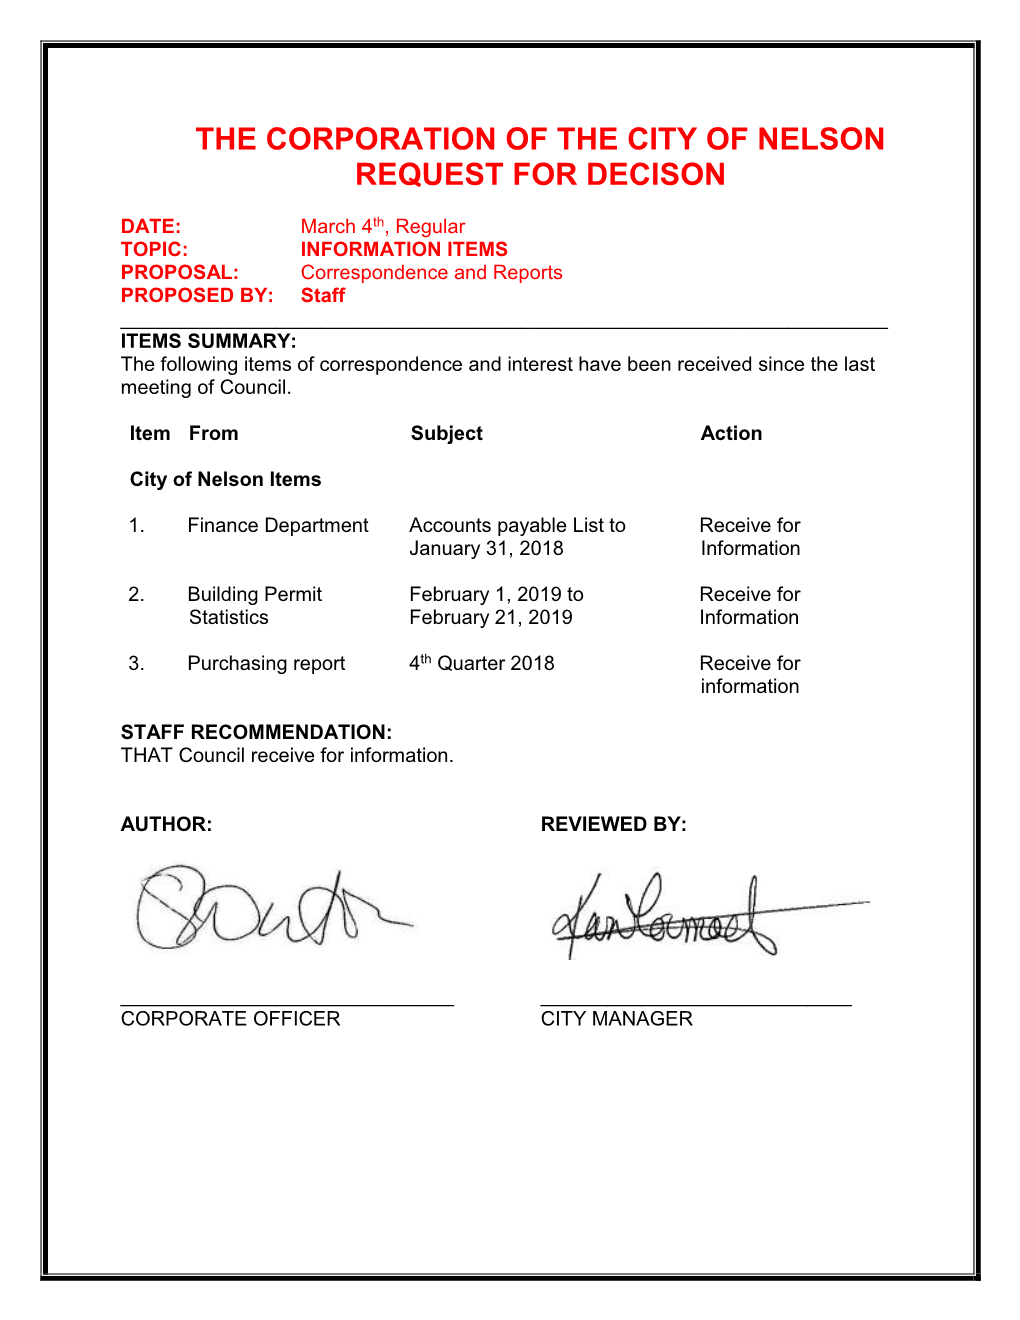 The Corporation of the City of Nelson Request for Decison